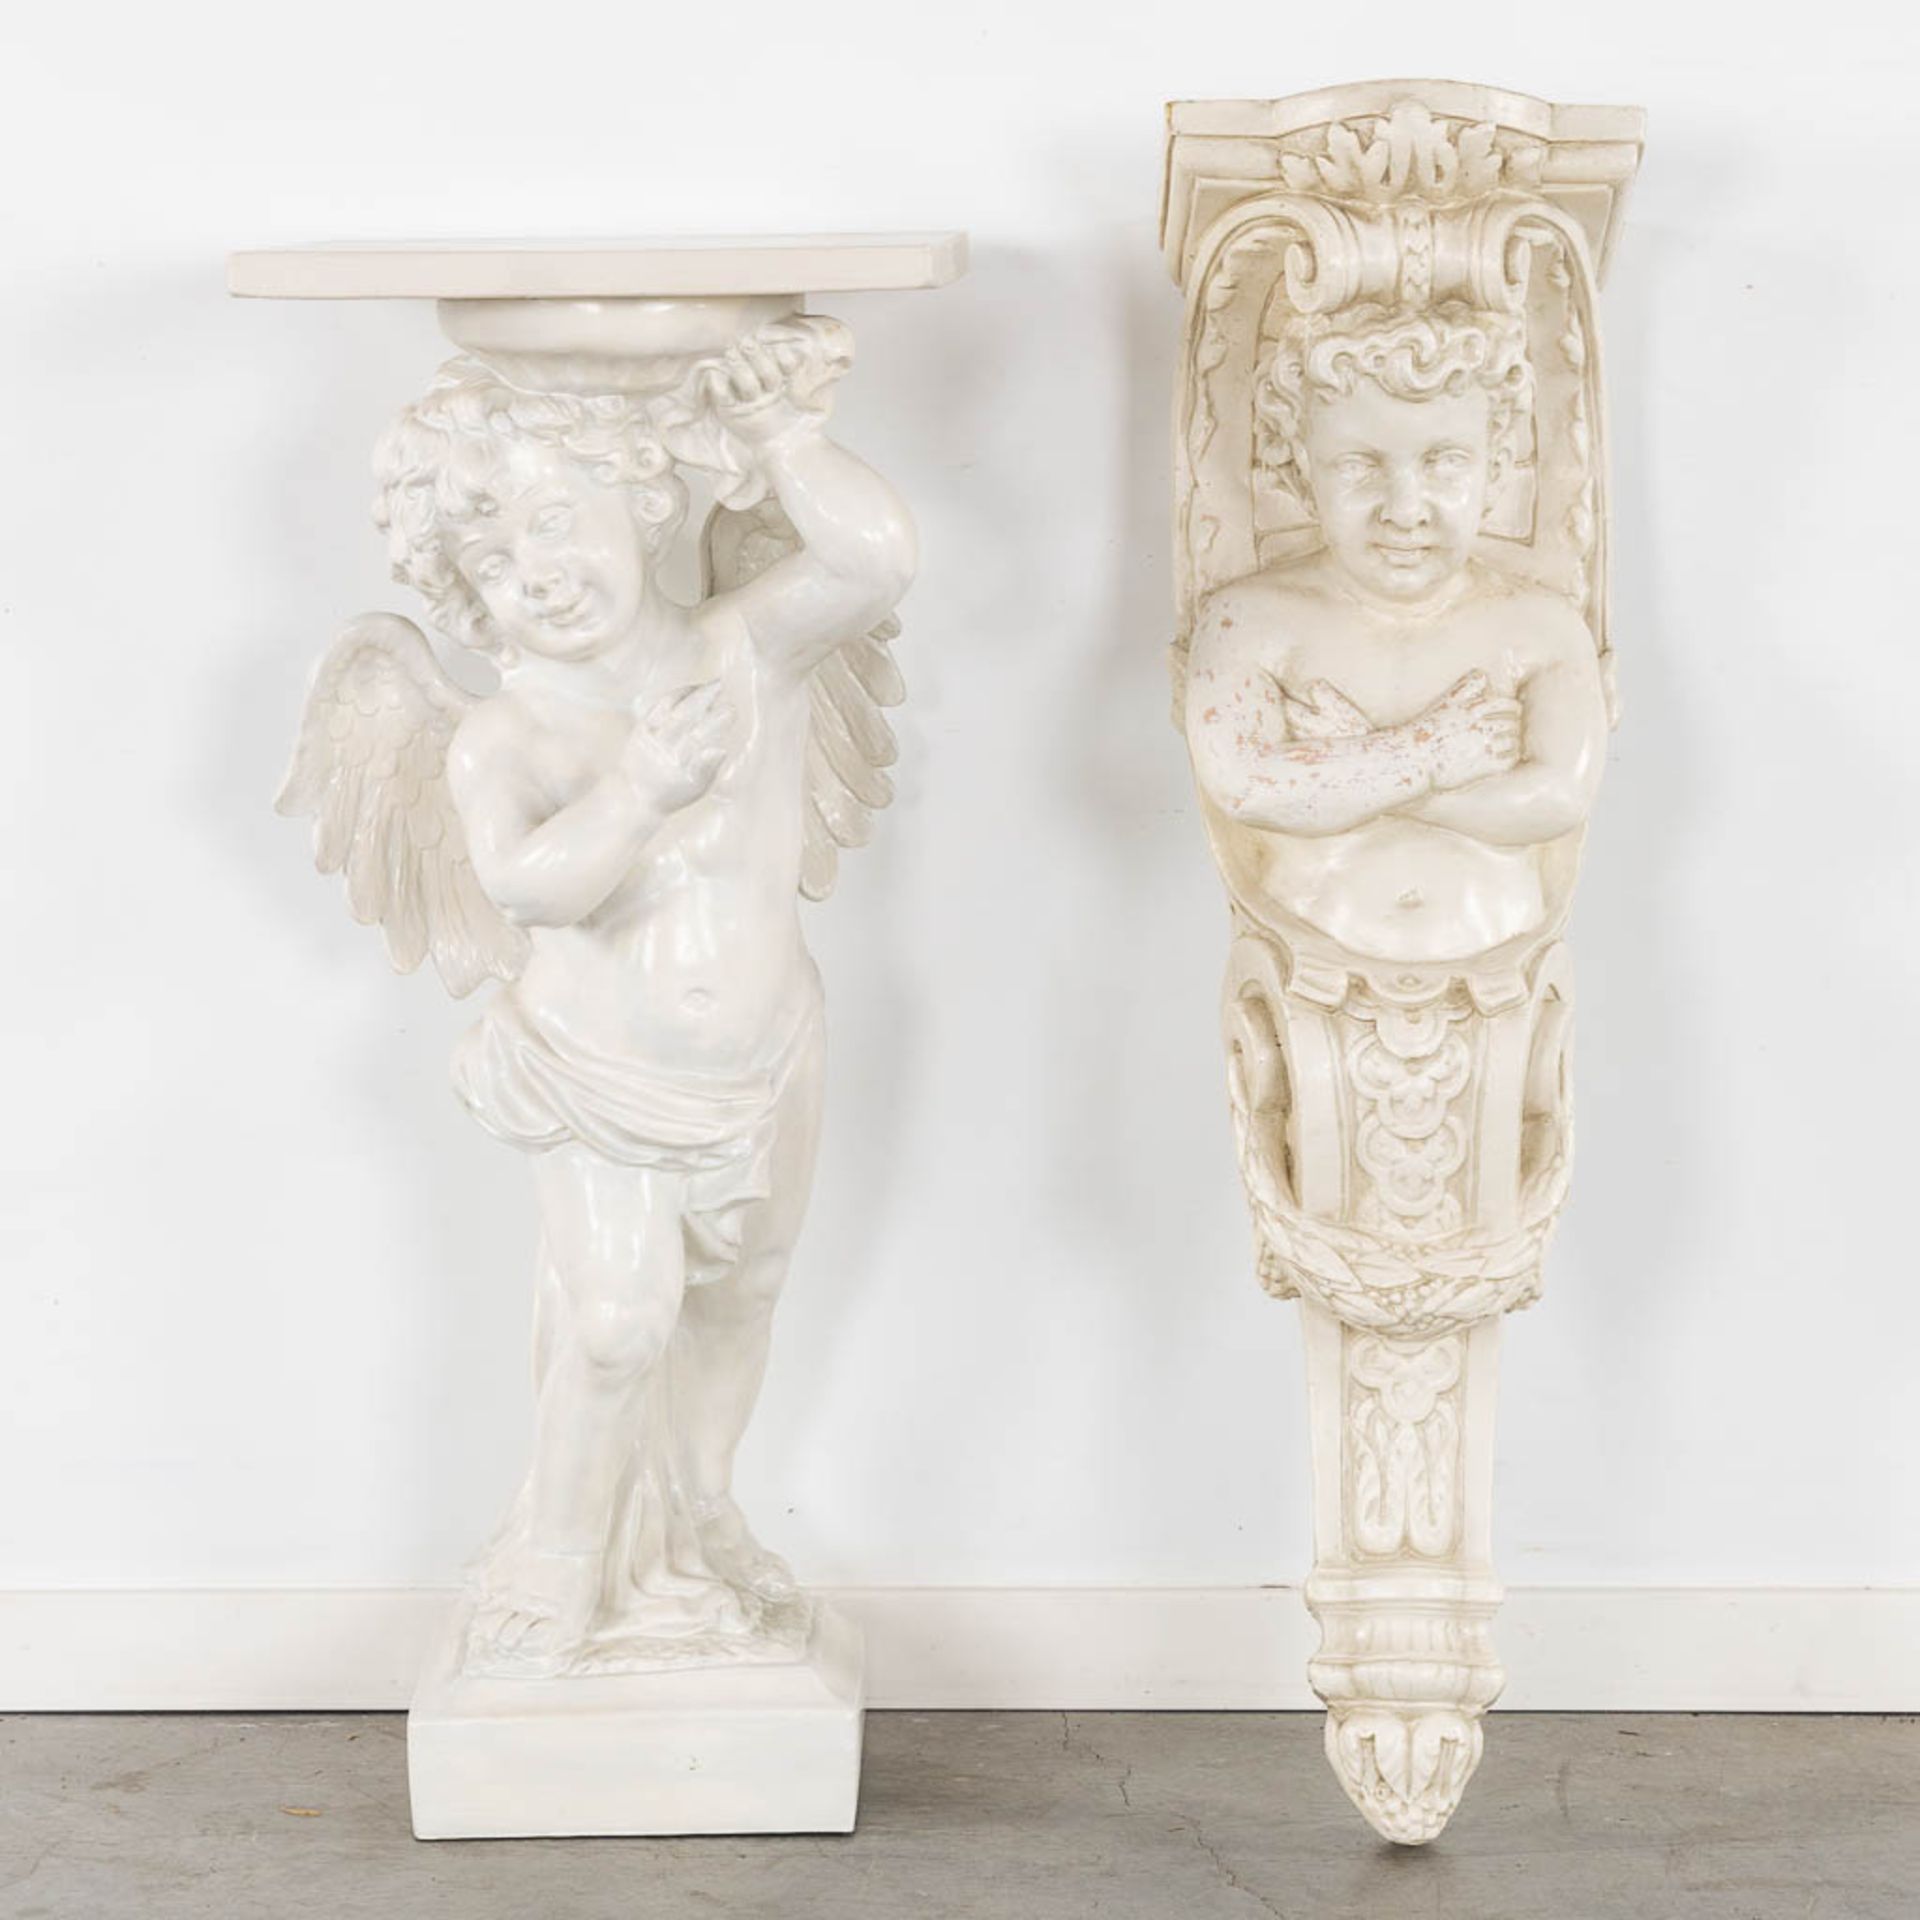 A pedestal for a figurine, Resine, added a wall mounted pedestal, patinated plaster. (L:24 x W:25 x